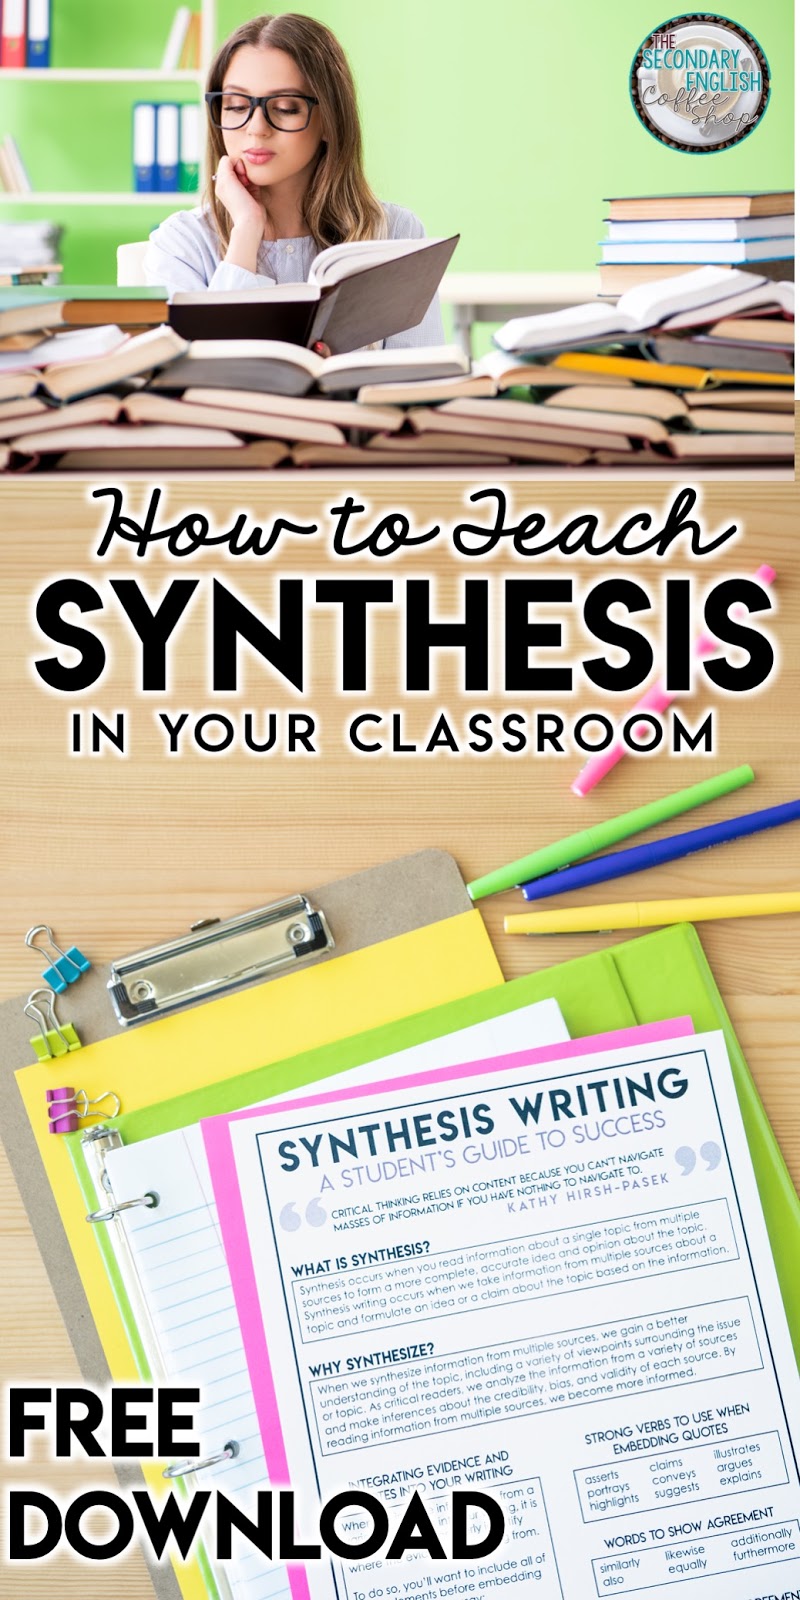 synthesis-writing-in-the-english-classroom-the-secondary-english-coffee-shop